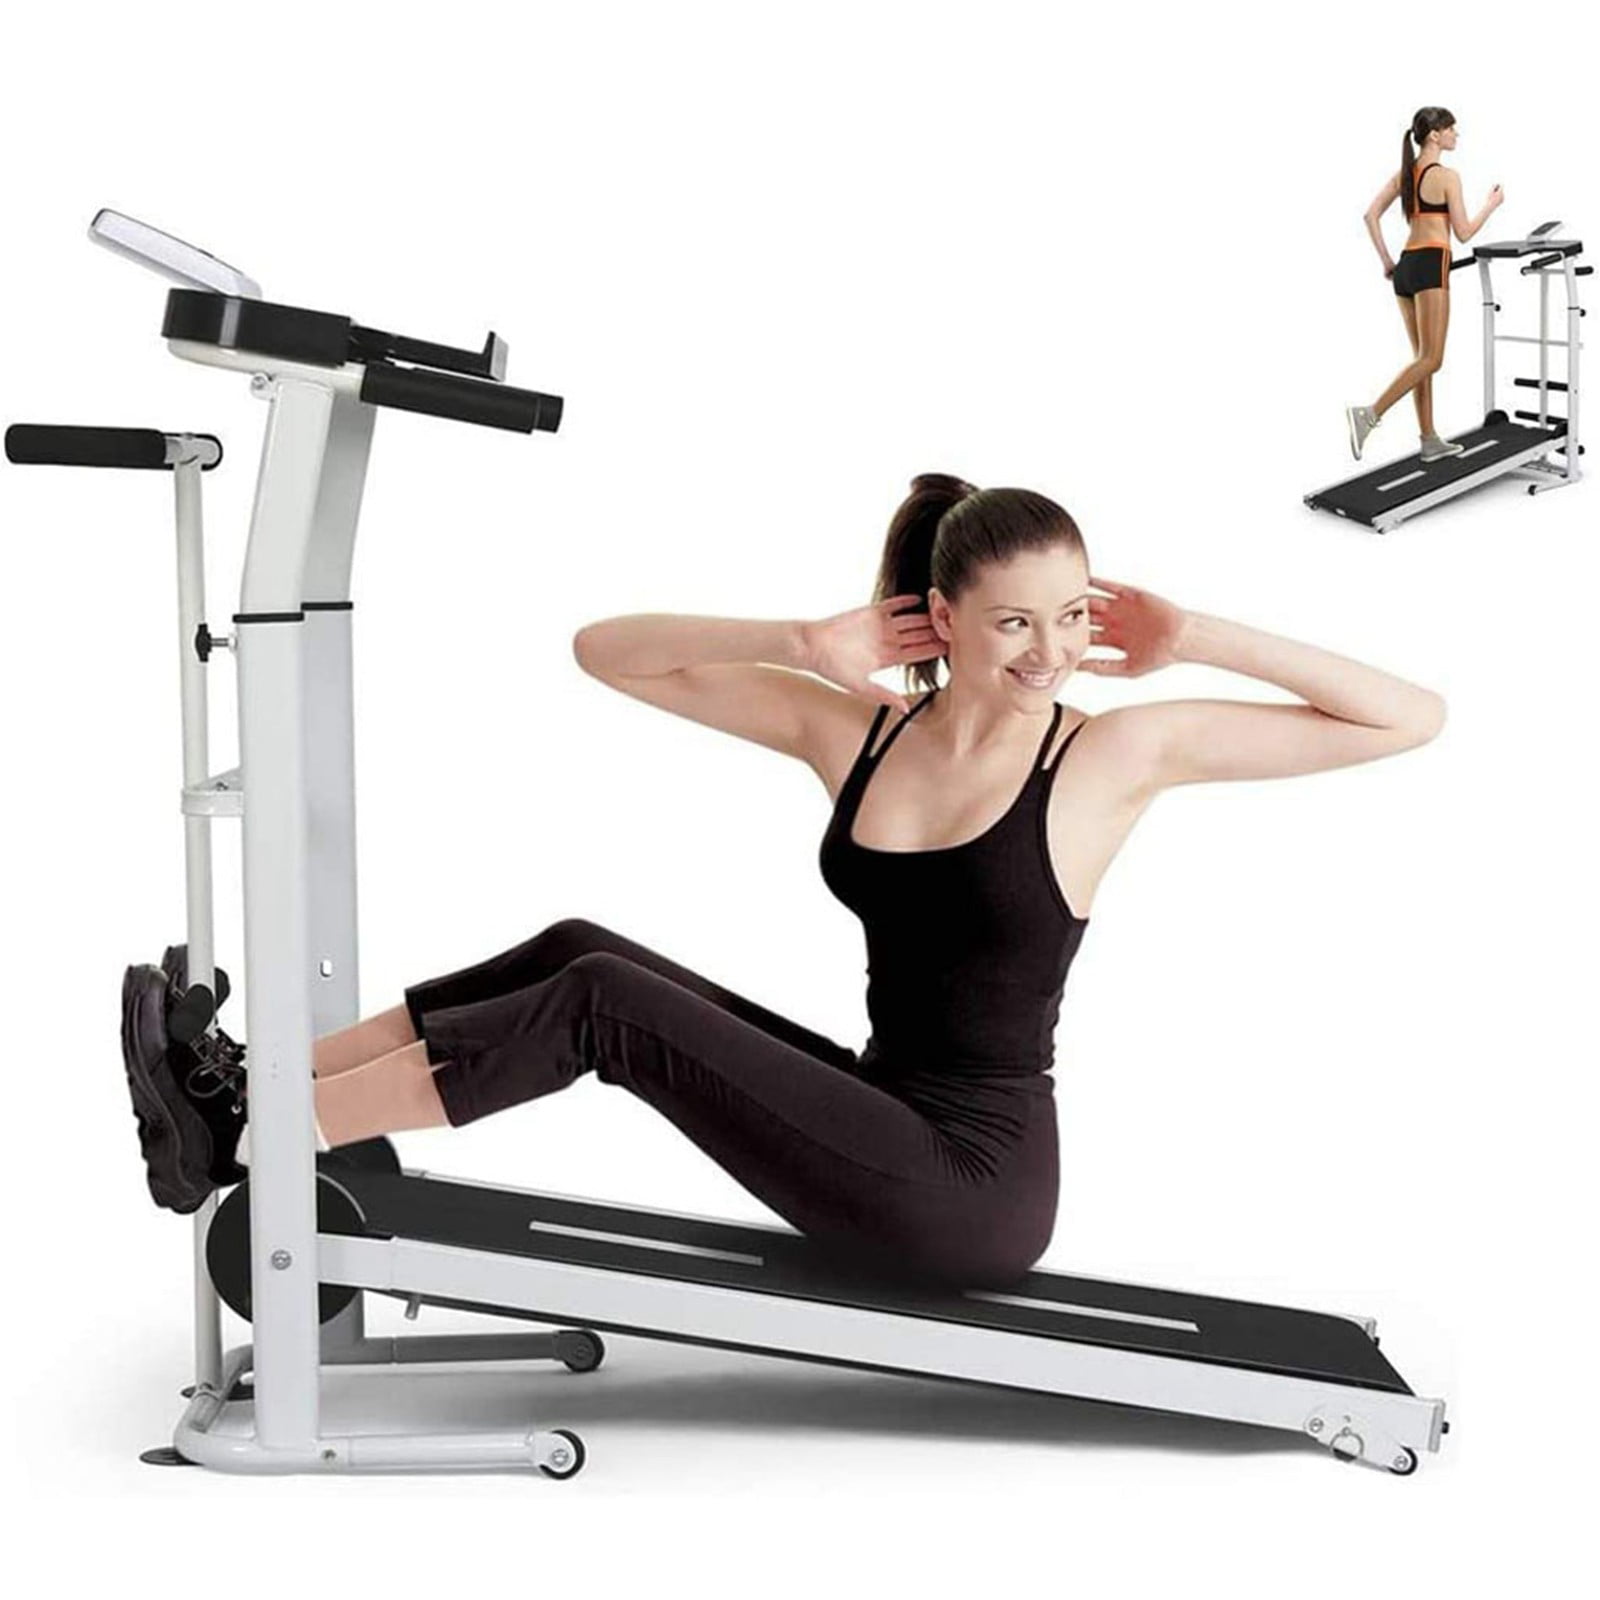 Folding Manual Treadmill working Machine Cardio Fitness Exercise Incline GYM 